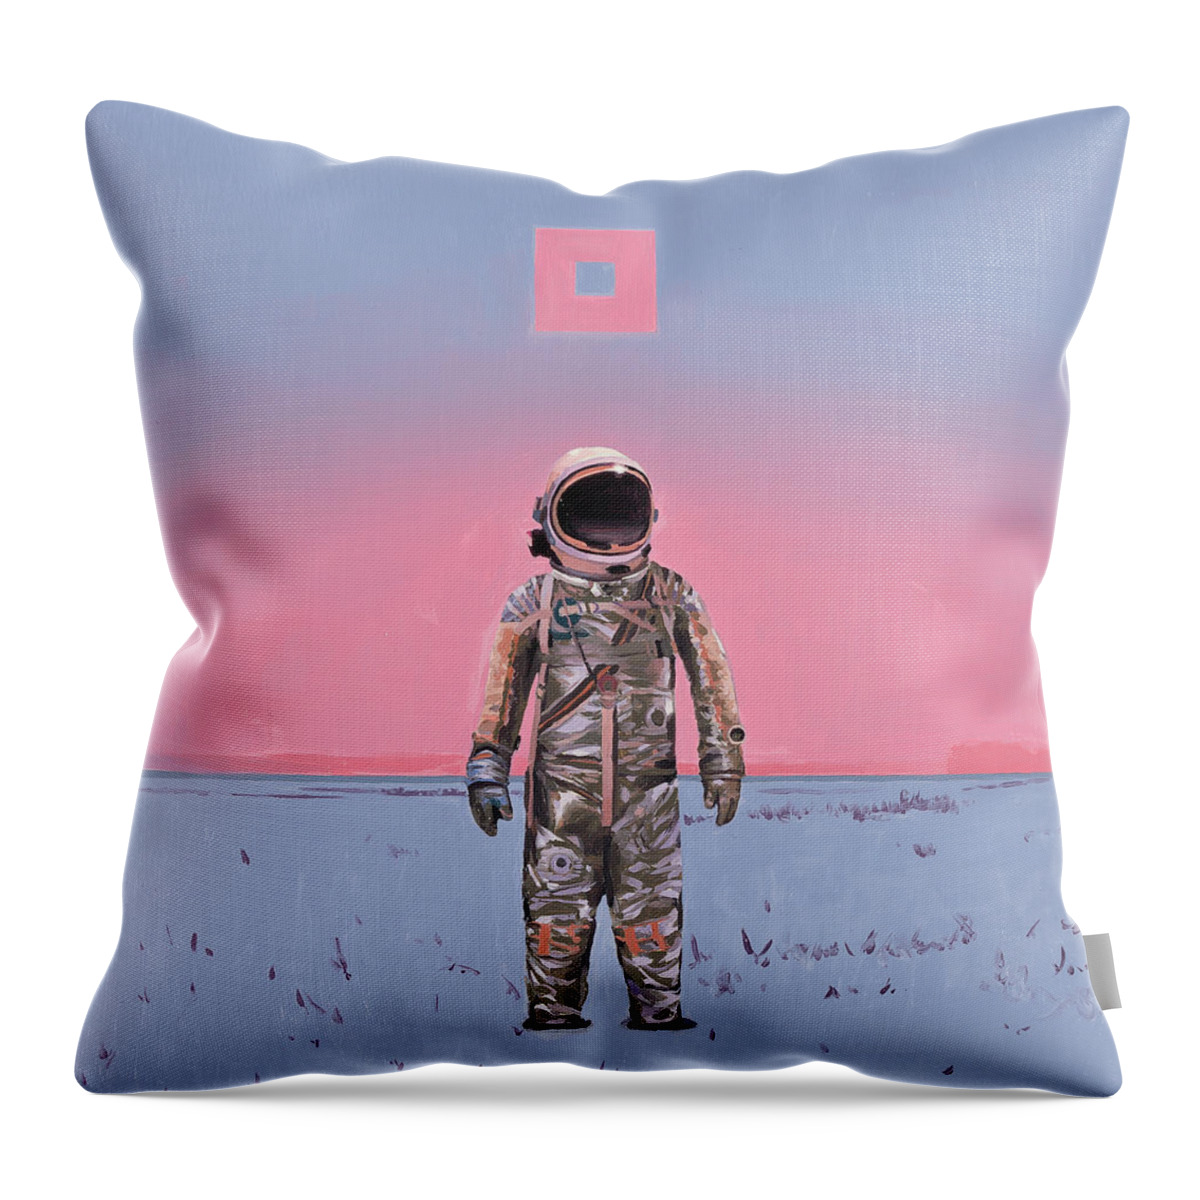 Space Throw Pillow featuring the painting Pink Square by Scott Listfield